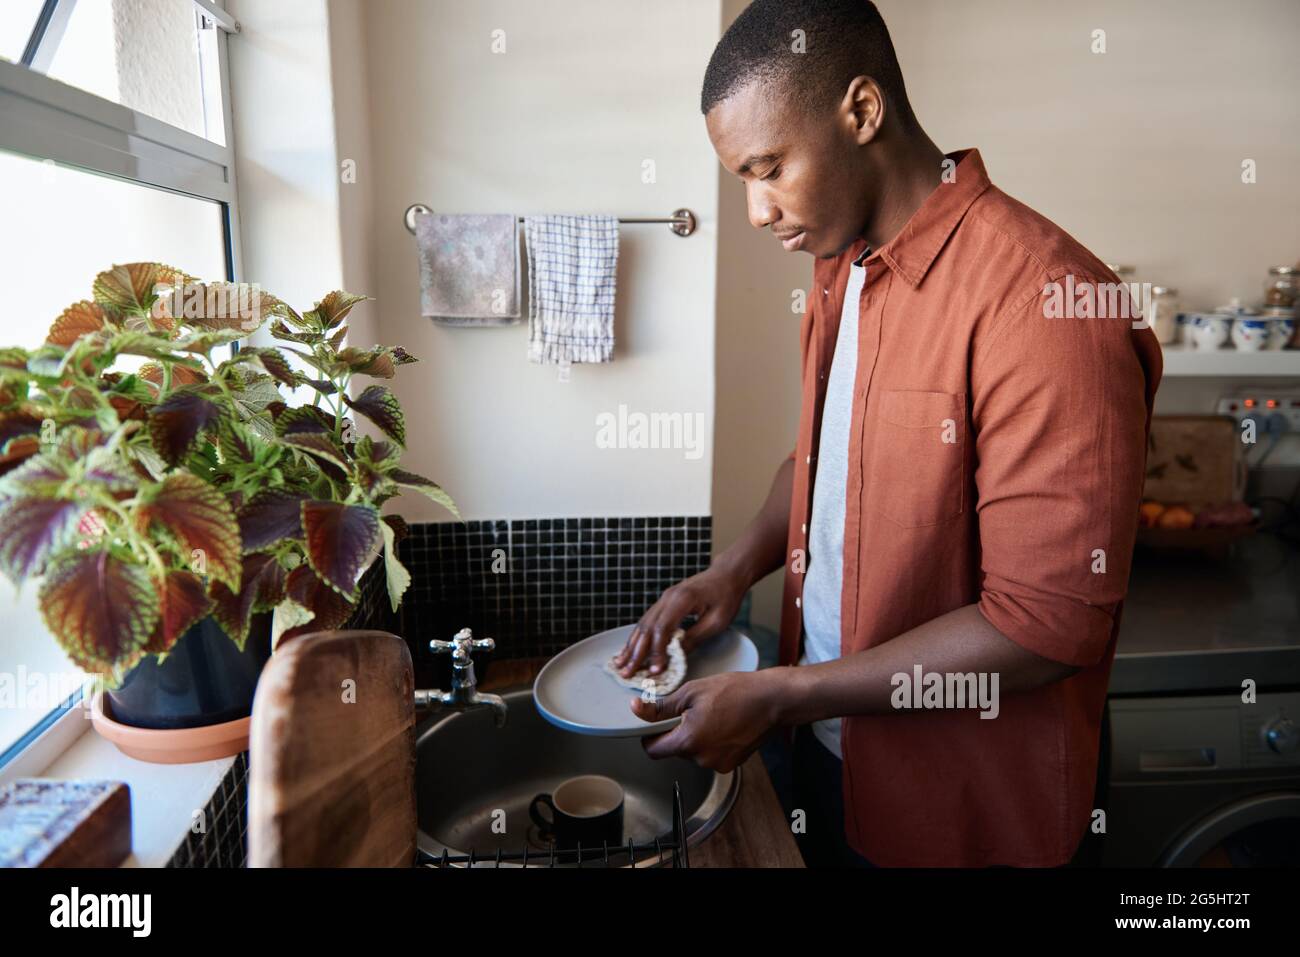 Young African man washing dishes in his kitchen sink at home Stock Photo